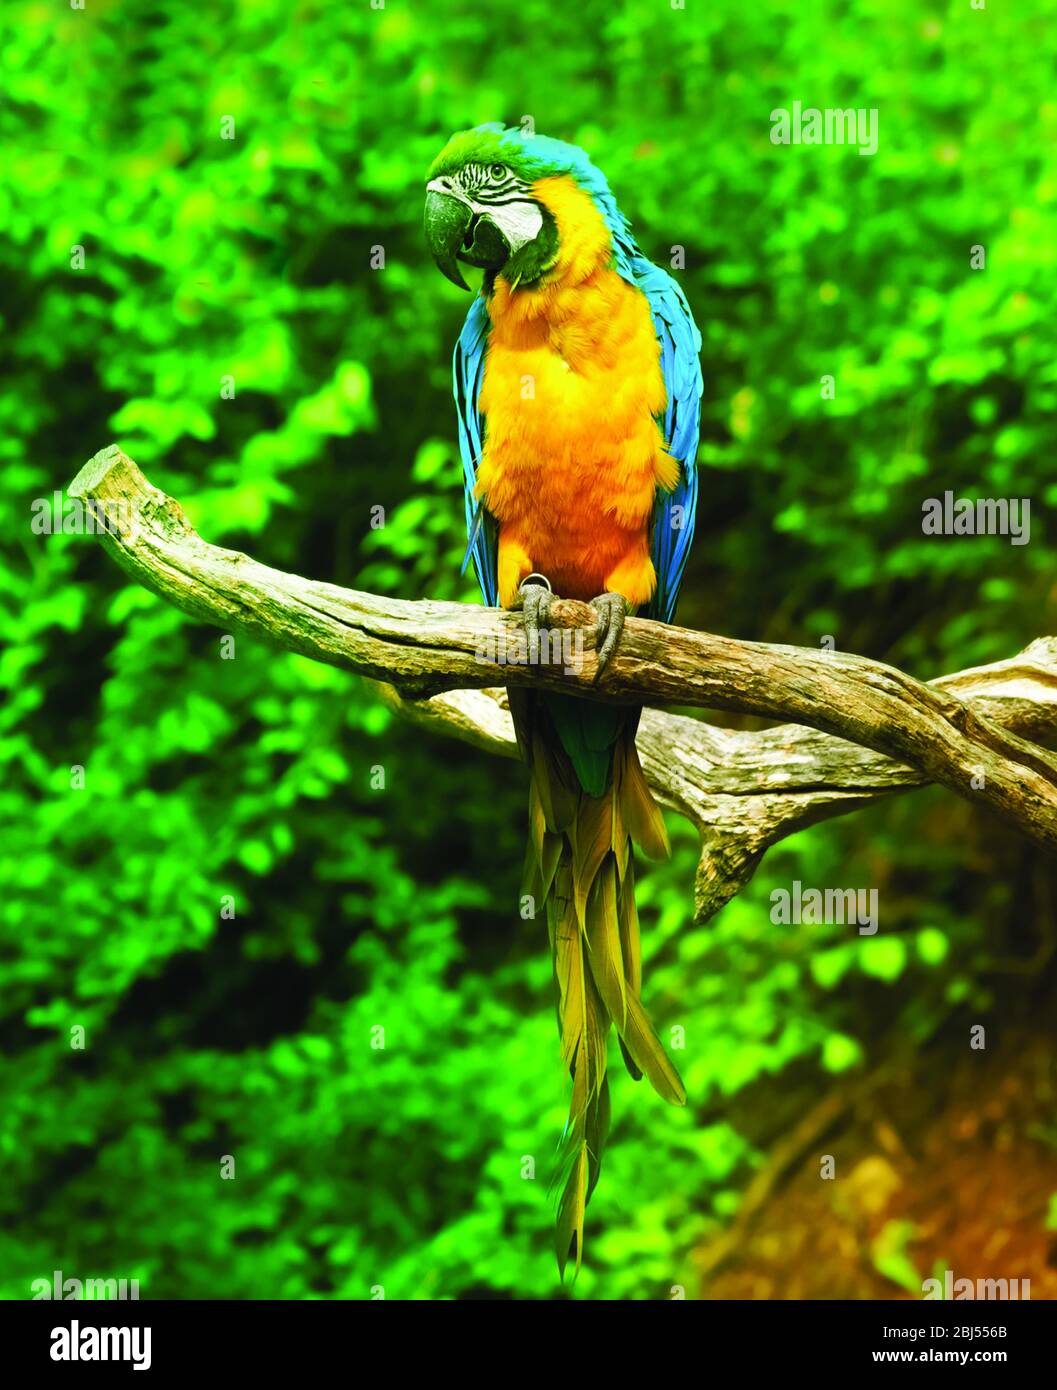 Stock Photo - Scarlet Macaws, Ara Macao, Bird Sitting on the Branch. Macaw Parrots in the Rain Forest. Stock Photo